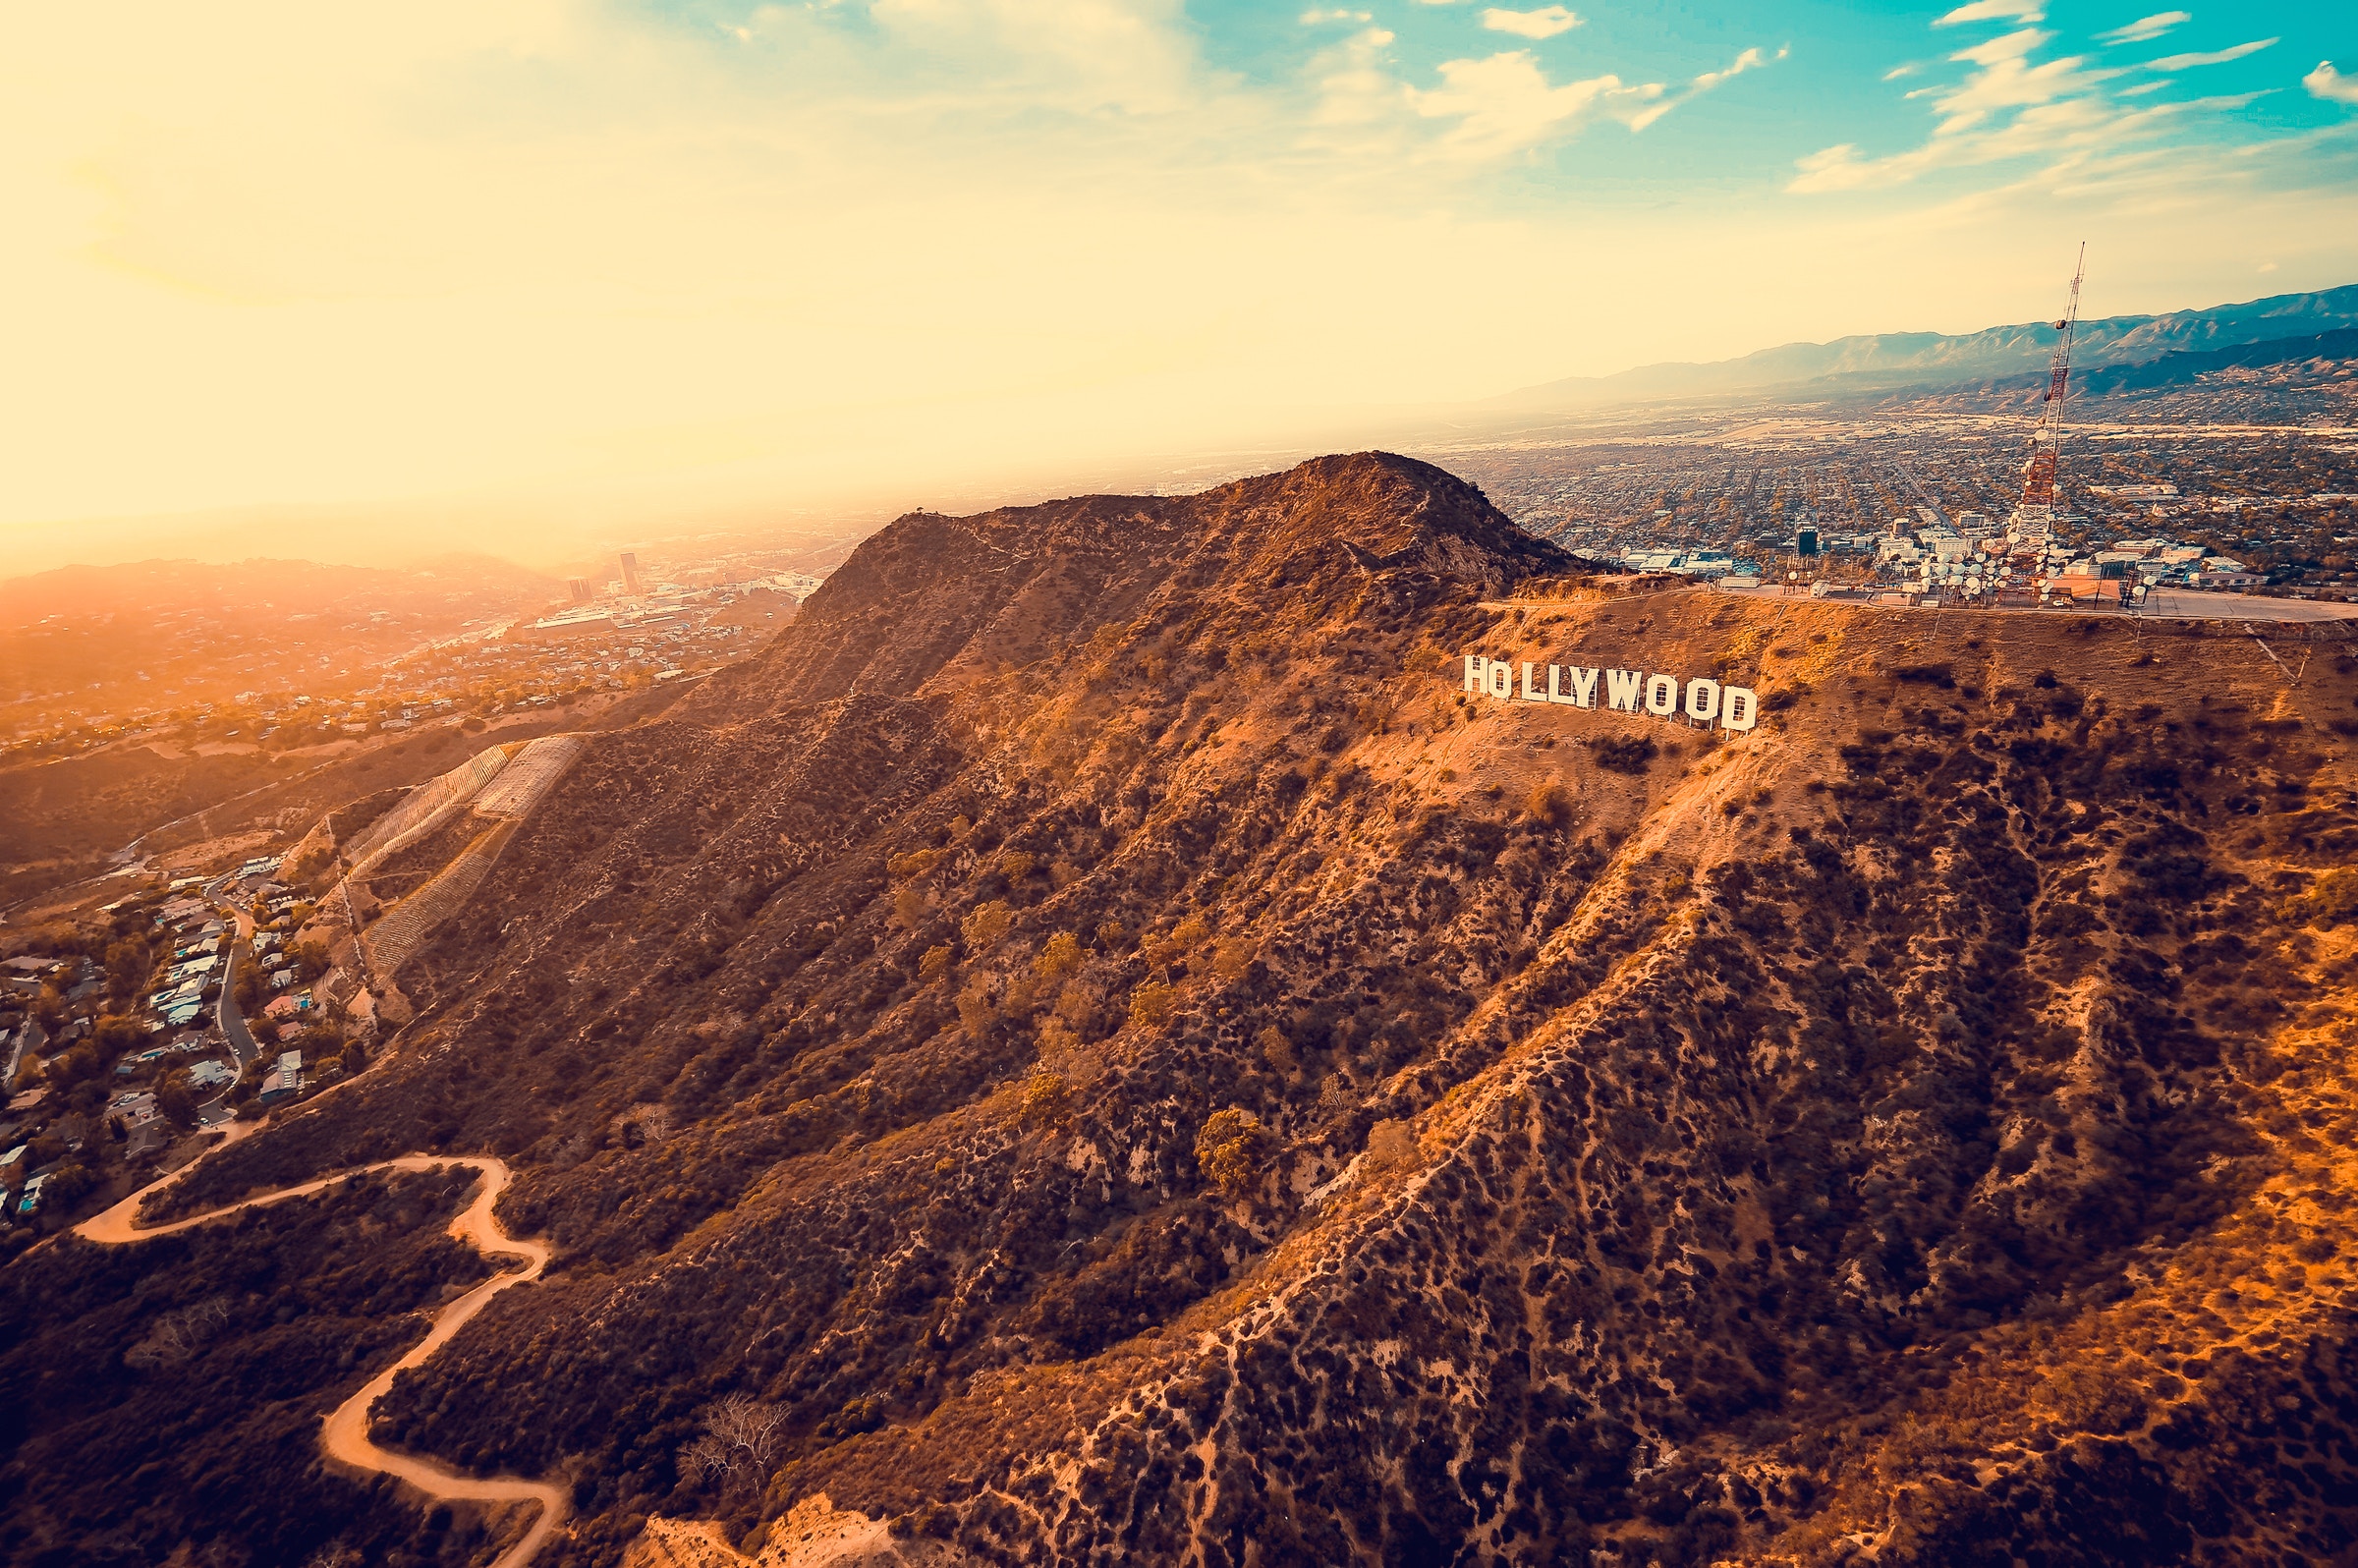 Top 12 Photography Spots in Los Angeles